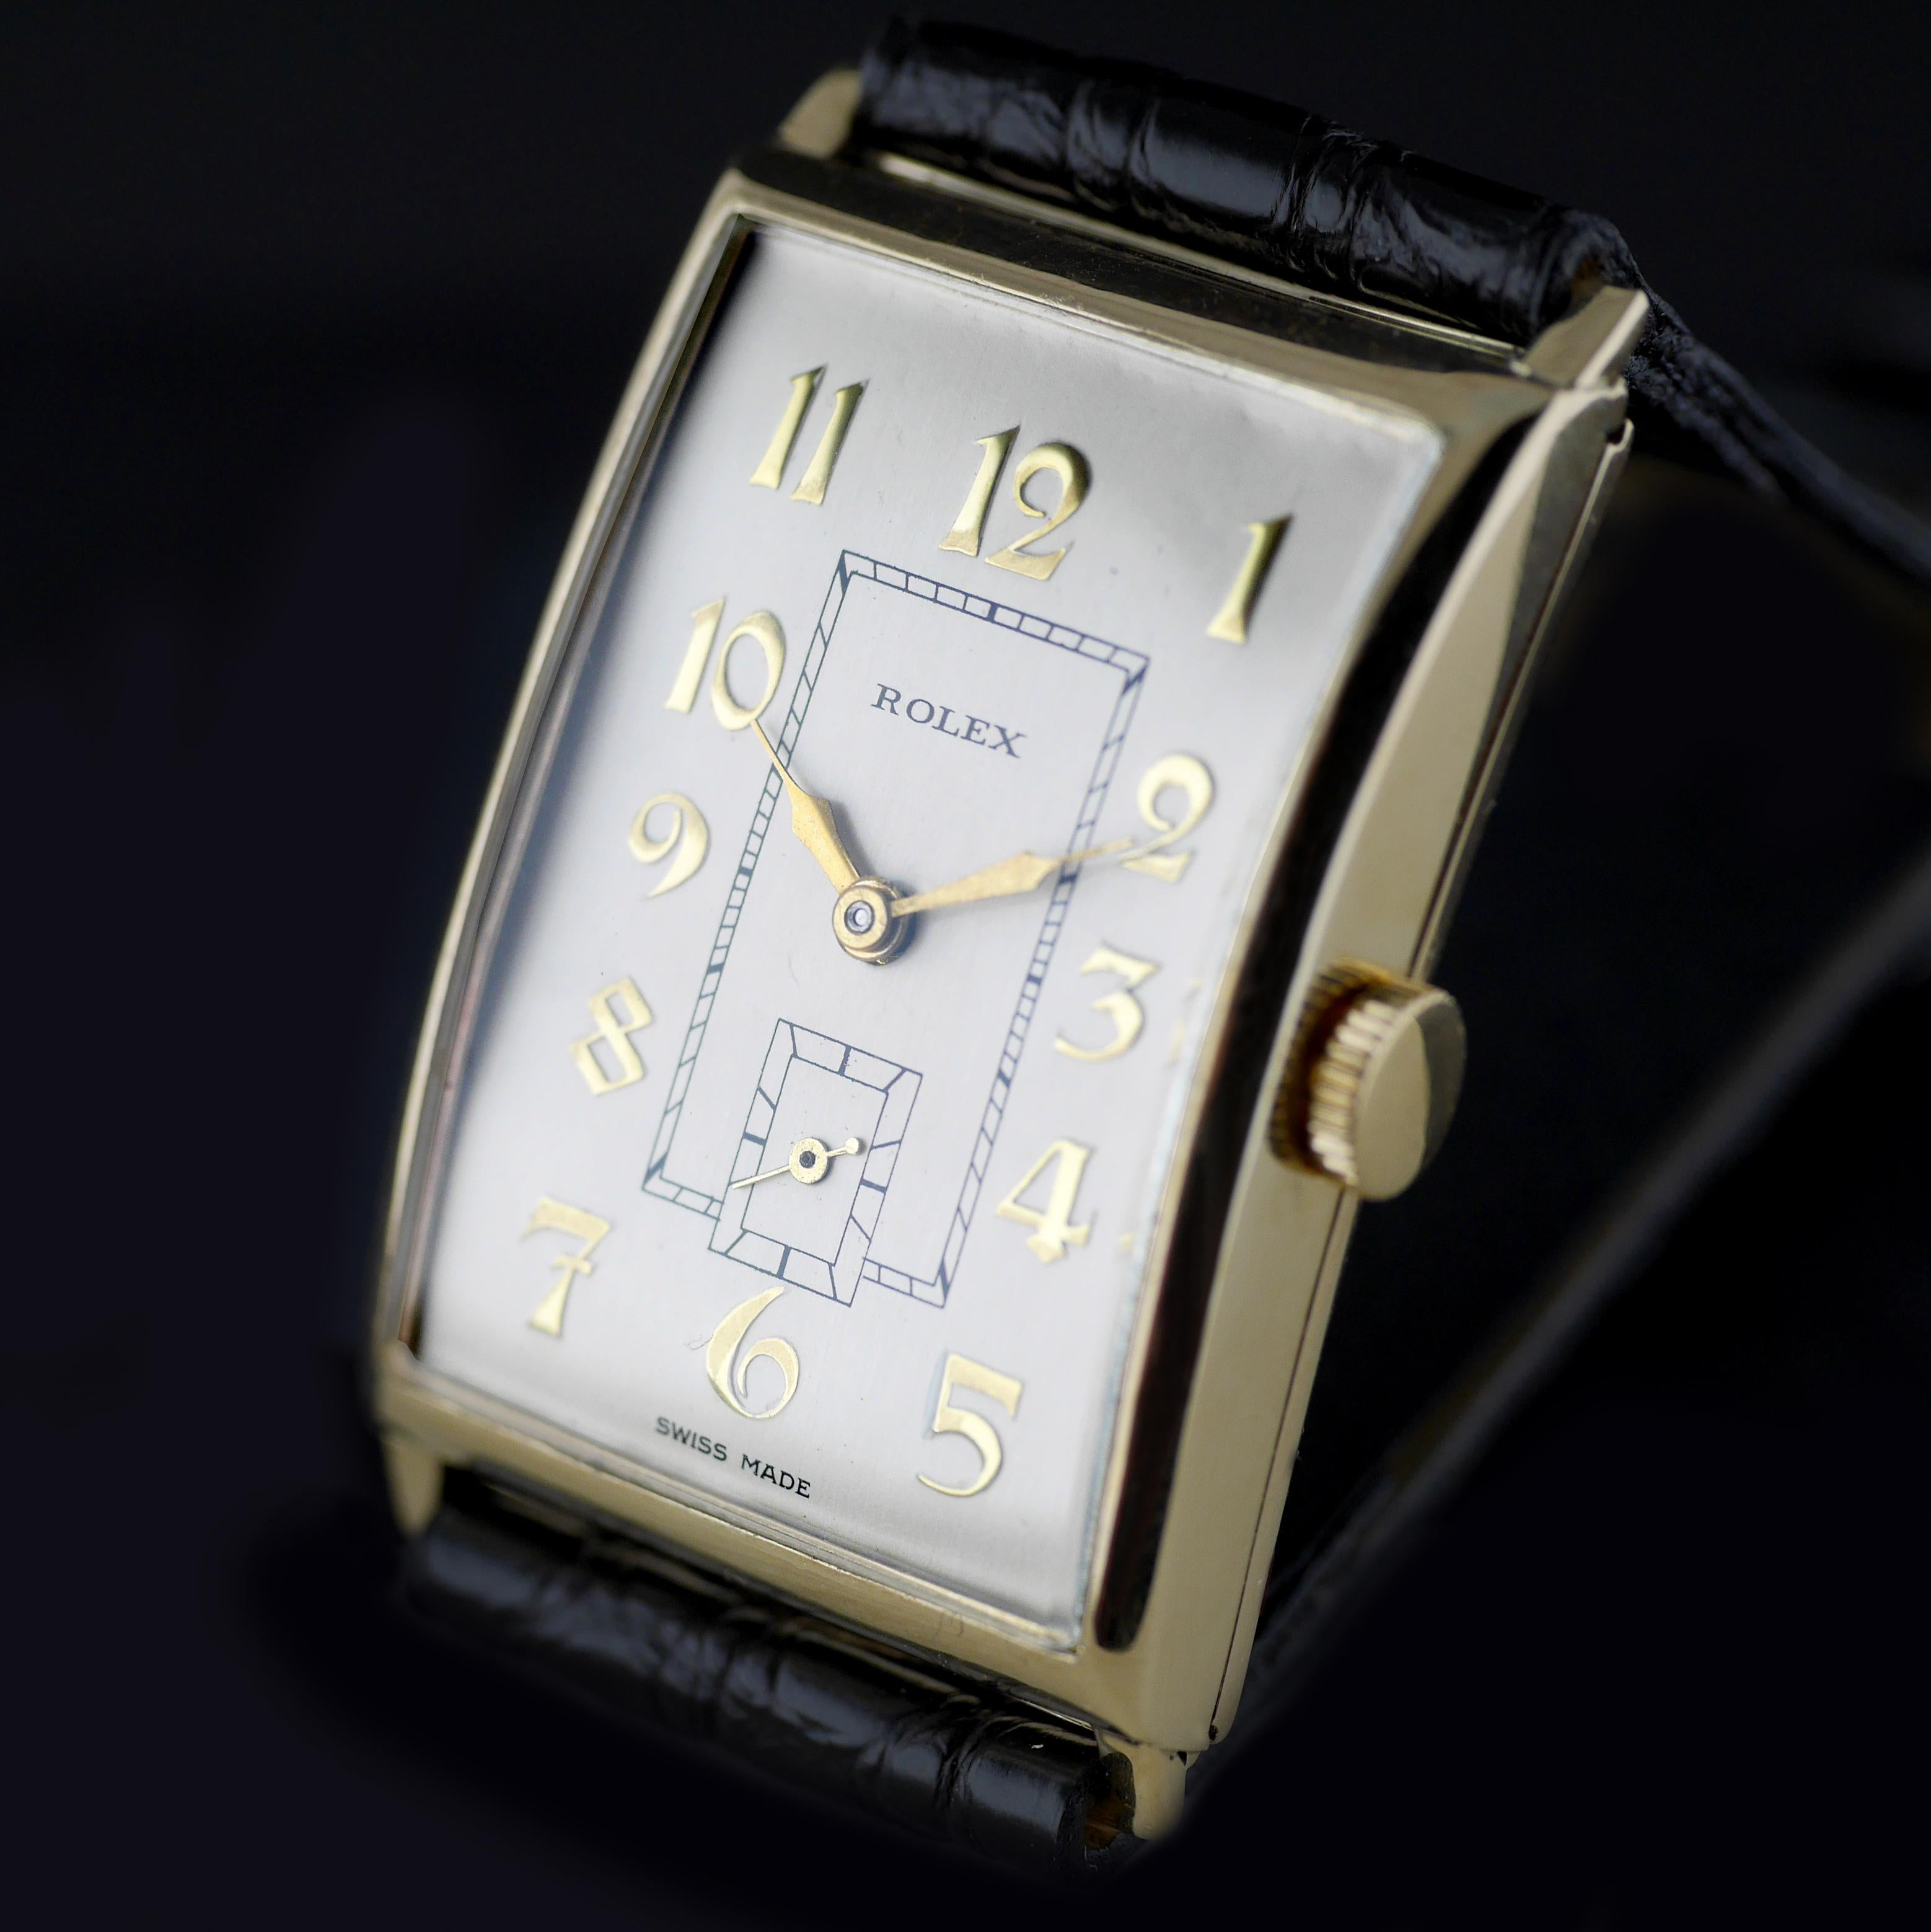 An Art Deco vintage wristwatch by Rolex made in 1930. A rare and unusually large size for a watch of this period, when the majority of watches were much smaller .

Gold rectangular shaped case marked with the “RWC Ltd” lozenge for the Rolex Watch